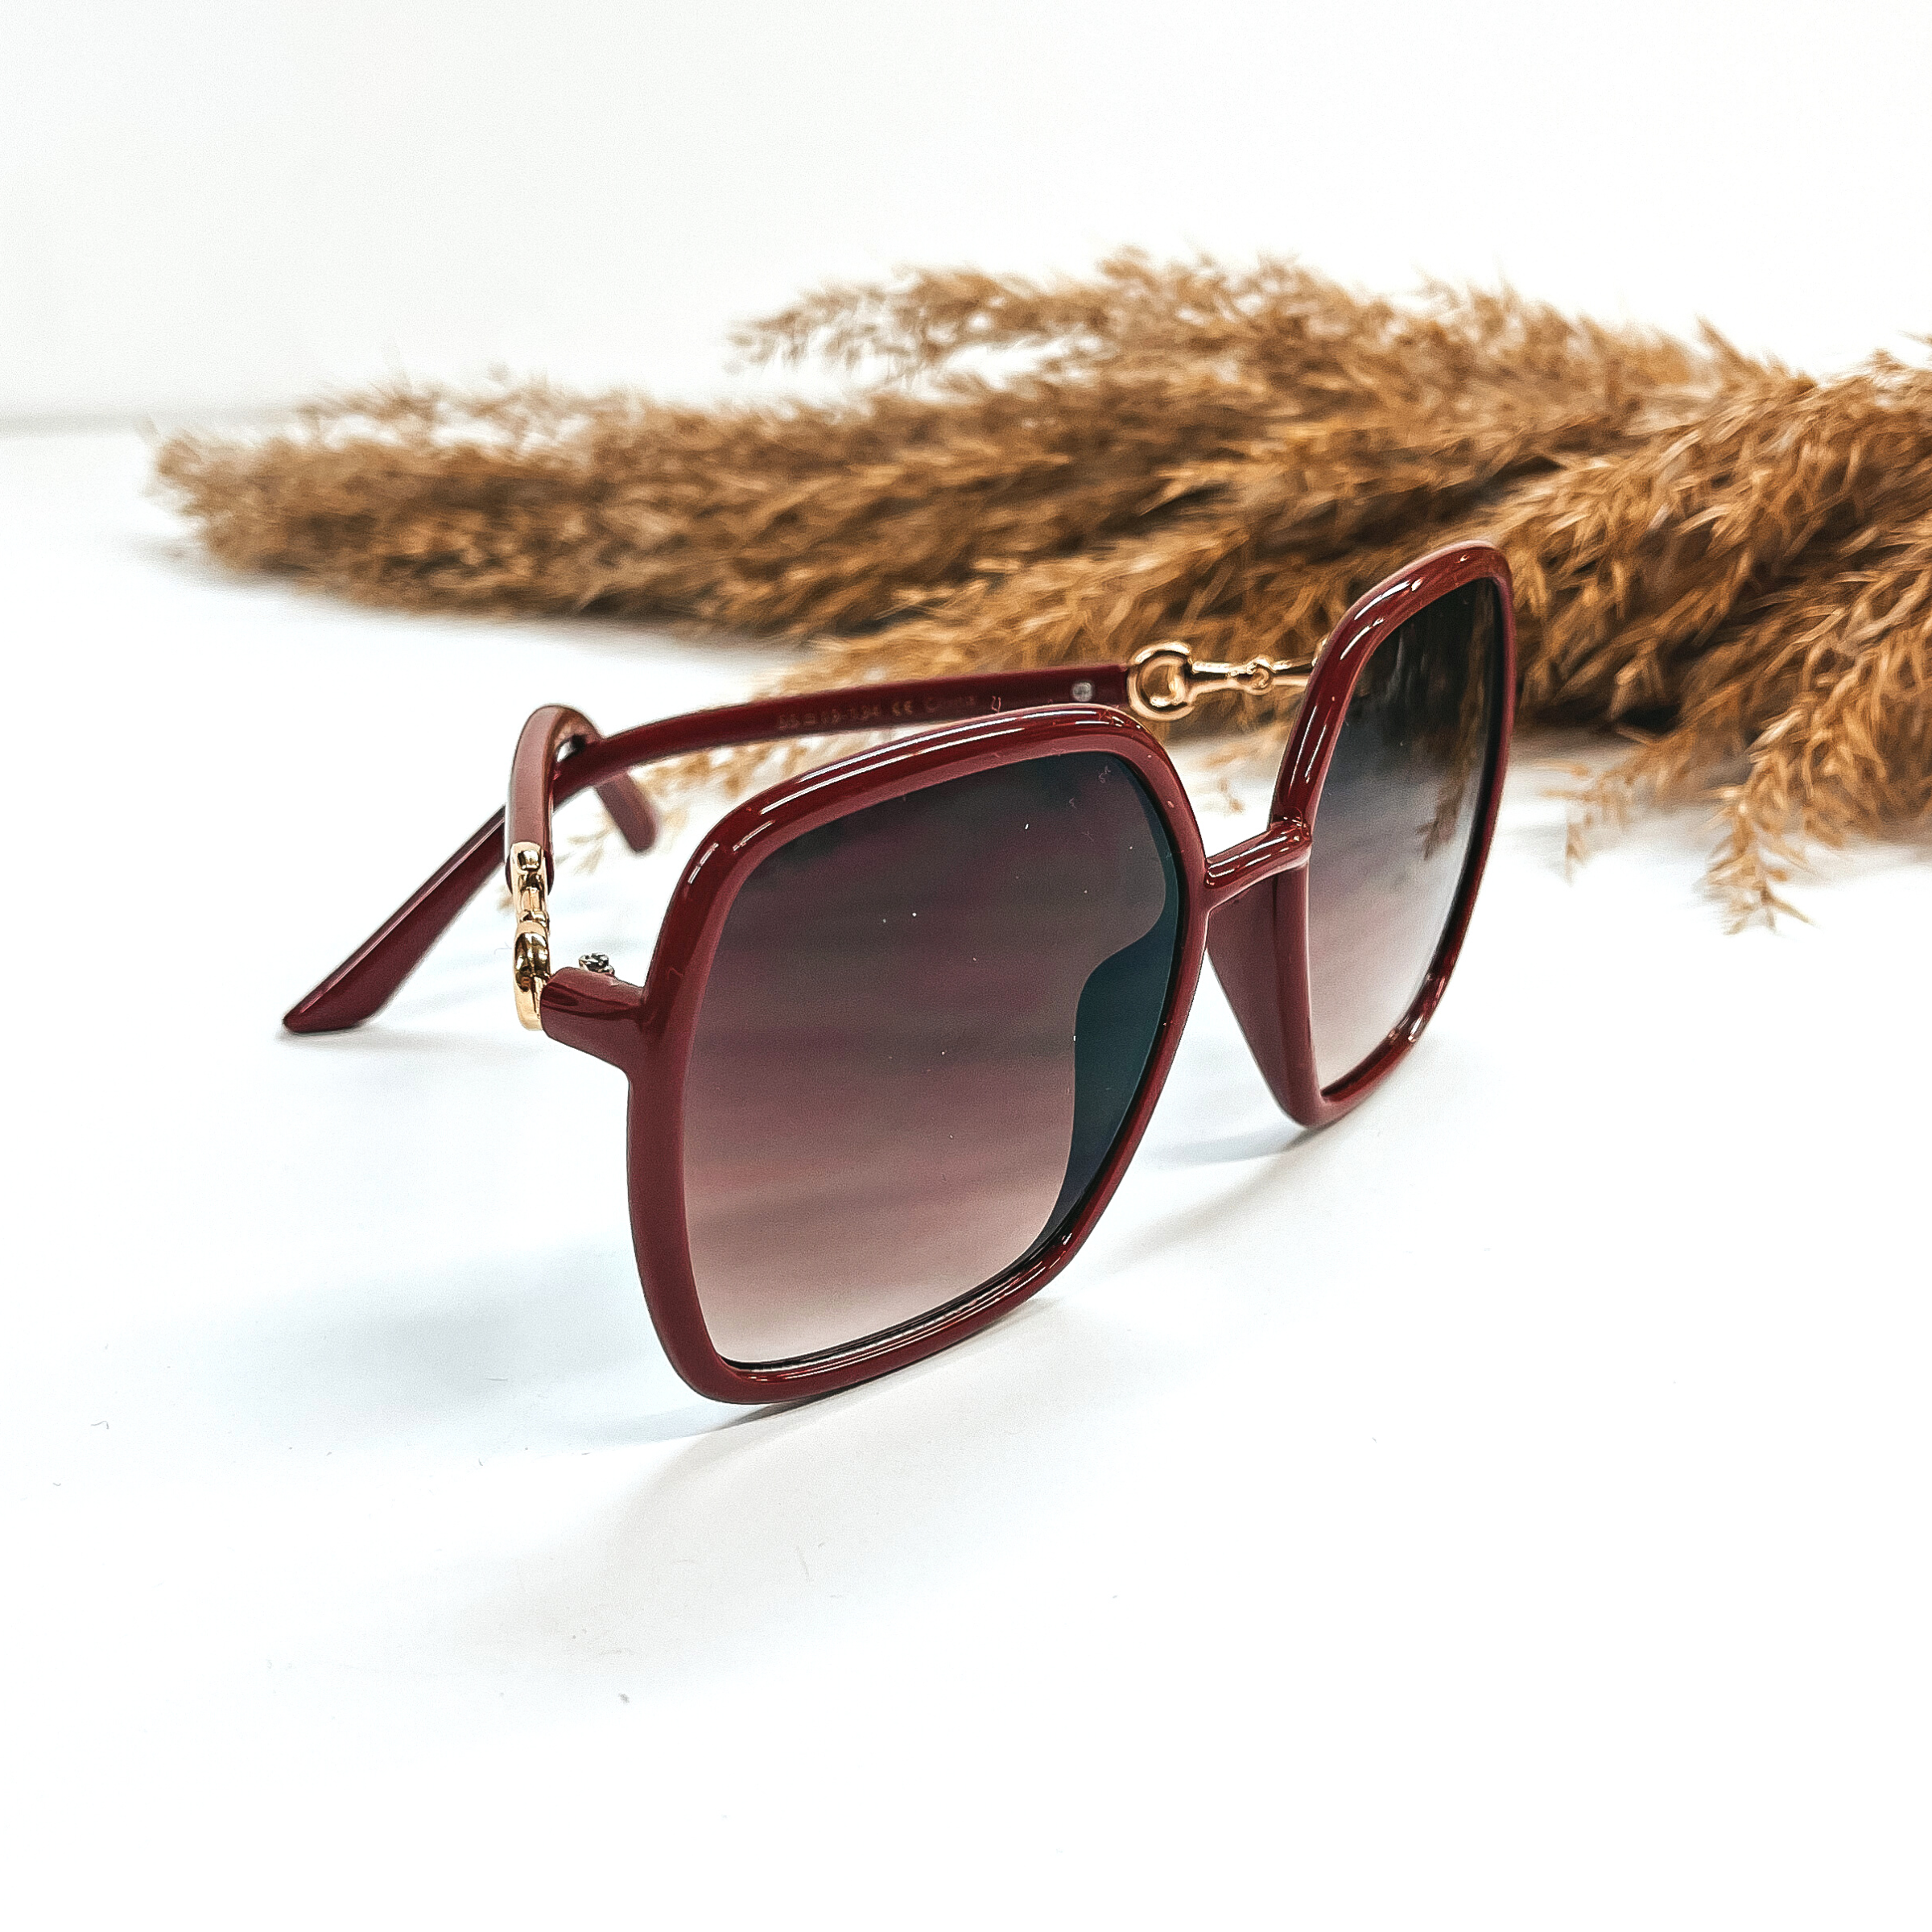 This is a pair of maroon frame, large, square sunglasses with a  red/brown lense.  The side of the glasses have gold detailing as a connector. These pair of  sunglasses are taken on a white background with a brown plant in the back as decor.